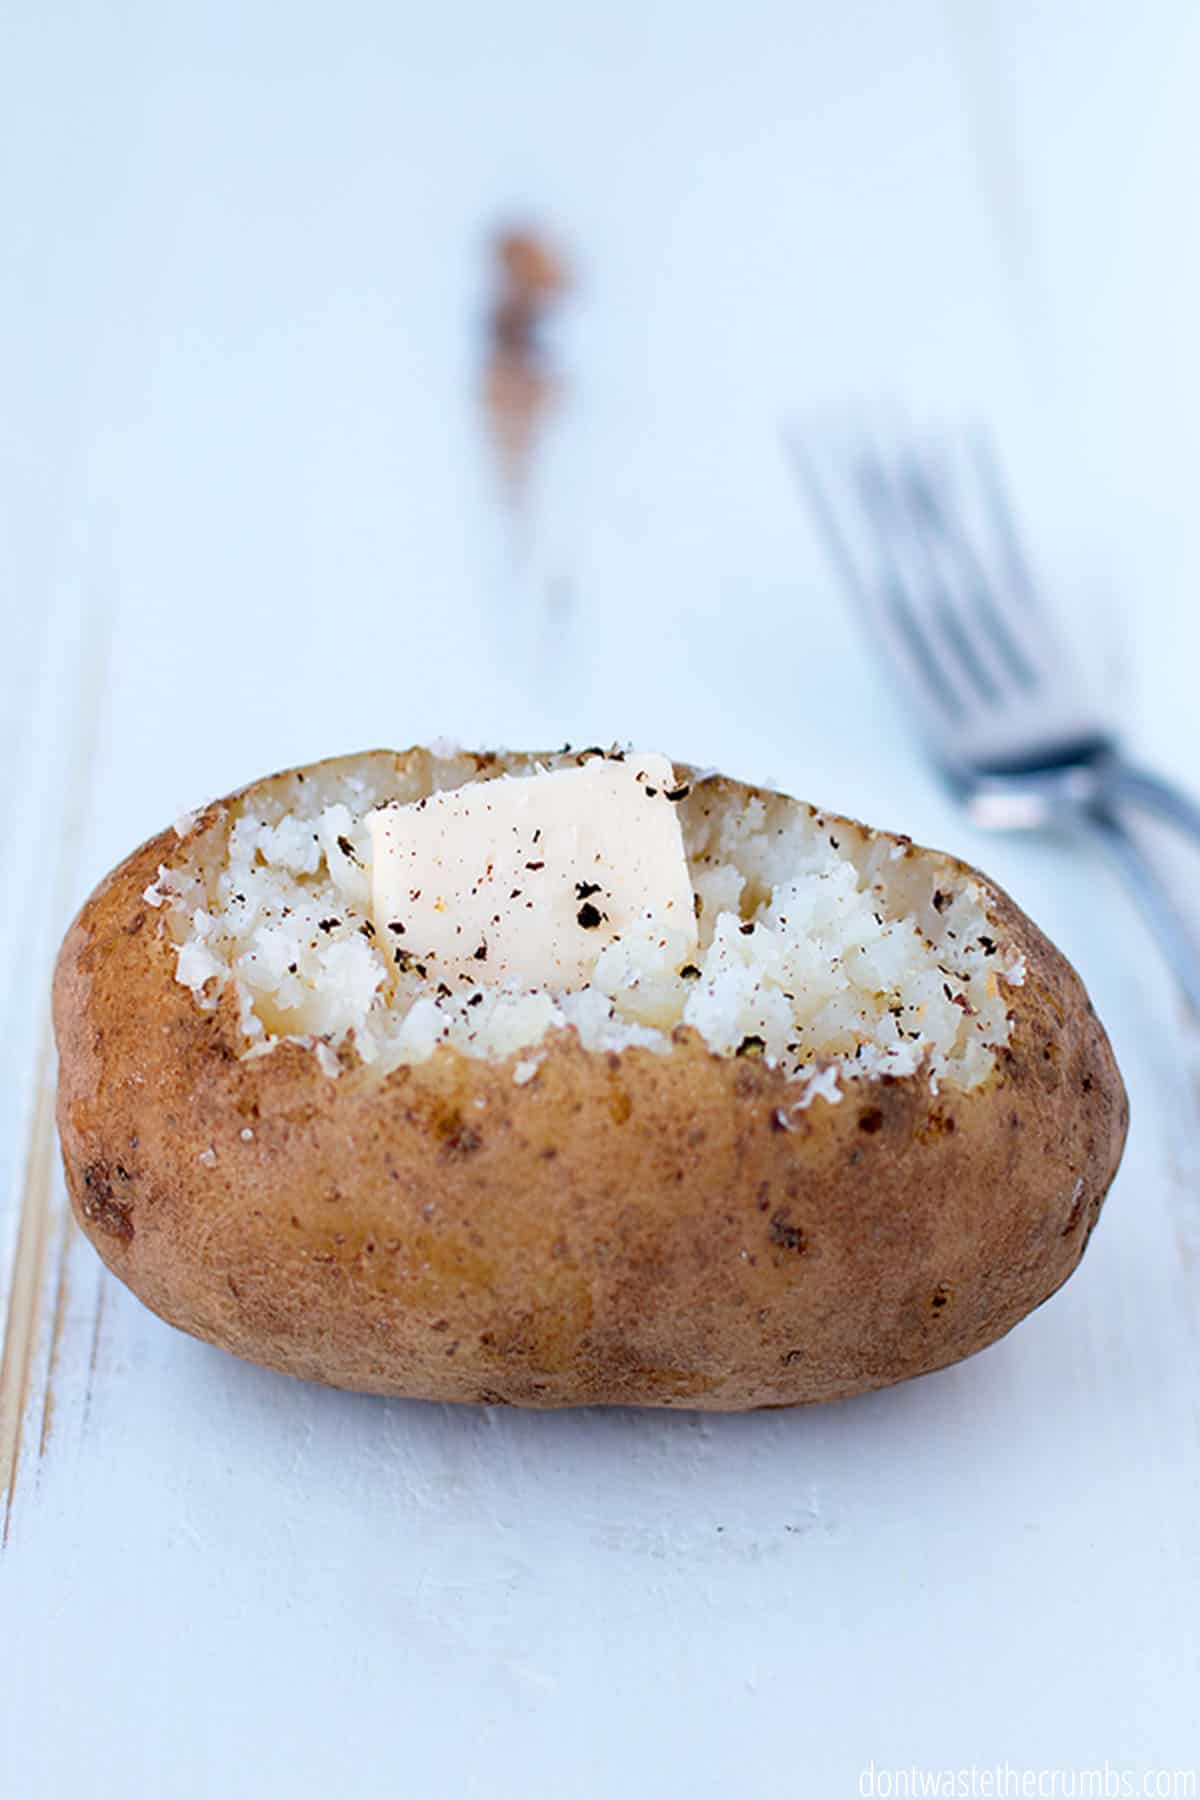 Perfectly baked potato seasoned with salt, pepper and a dollop of butter.